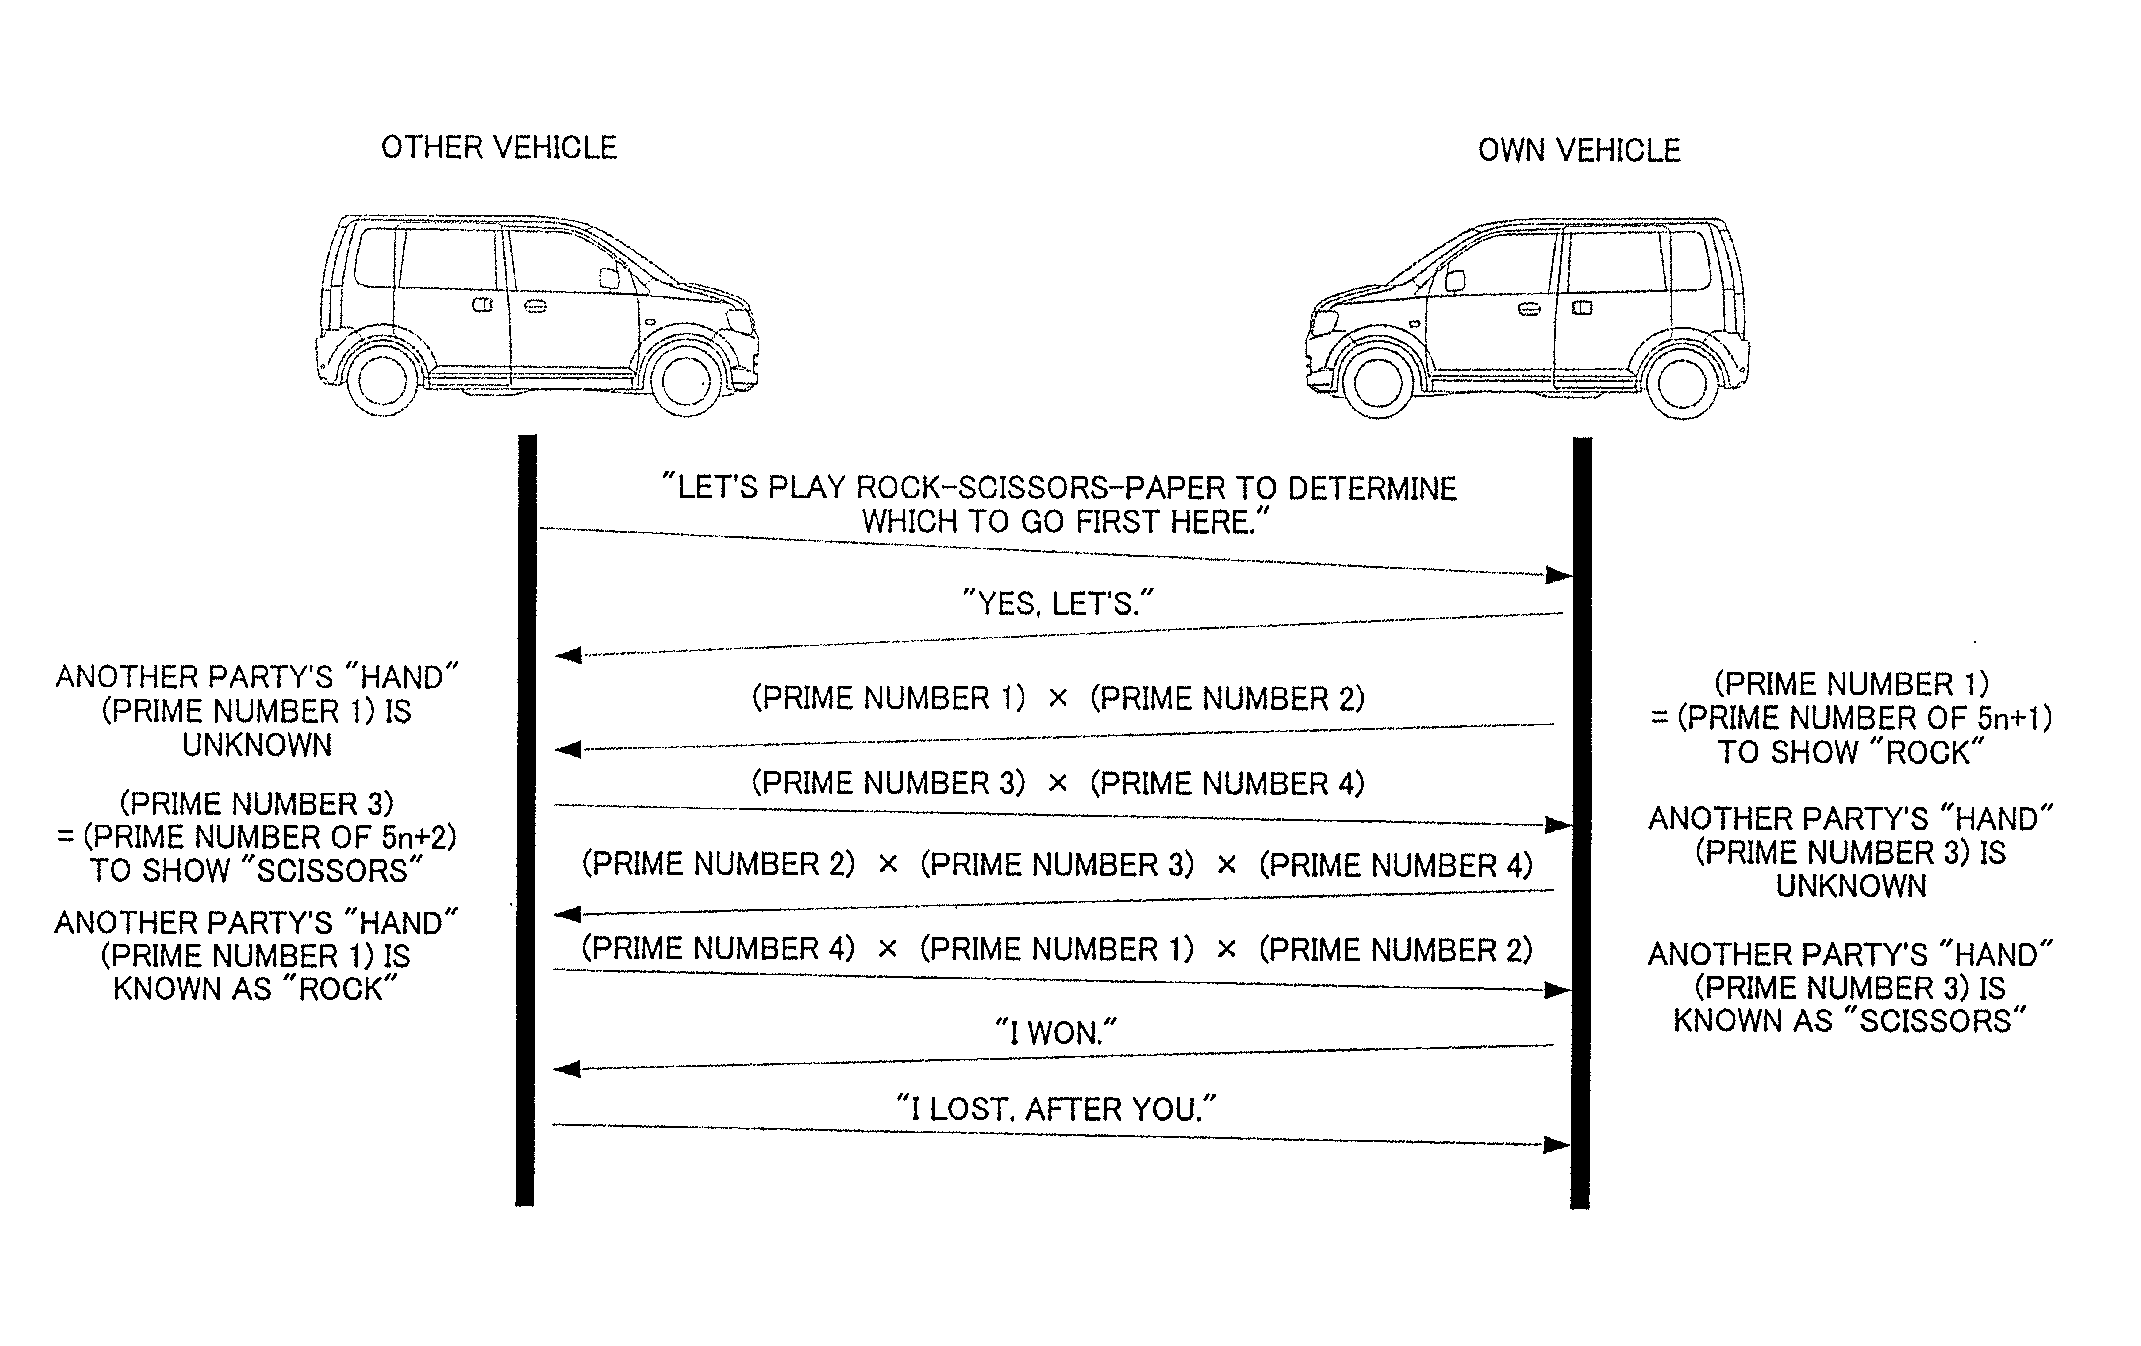 Automatic driving control system and automatic driving control method